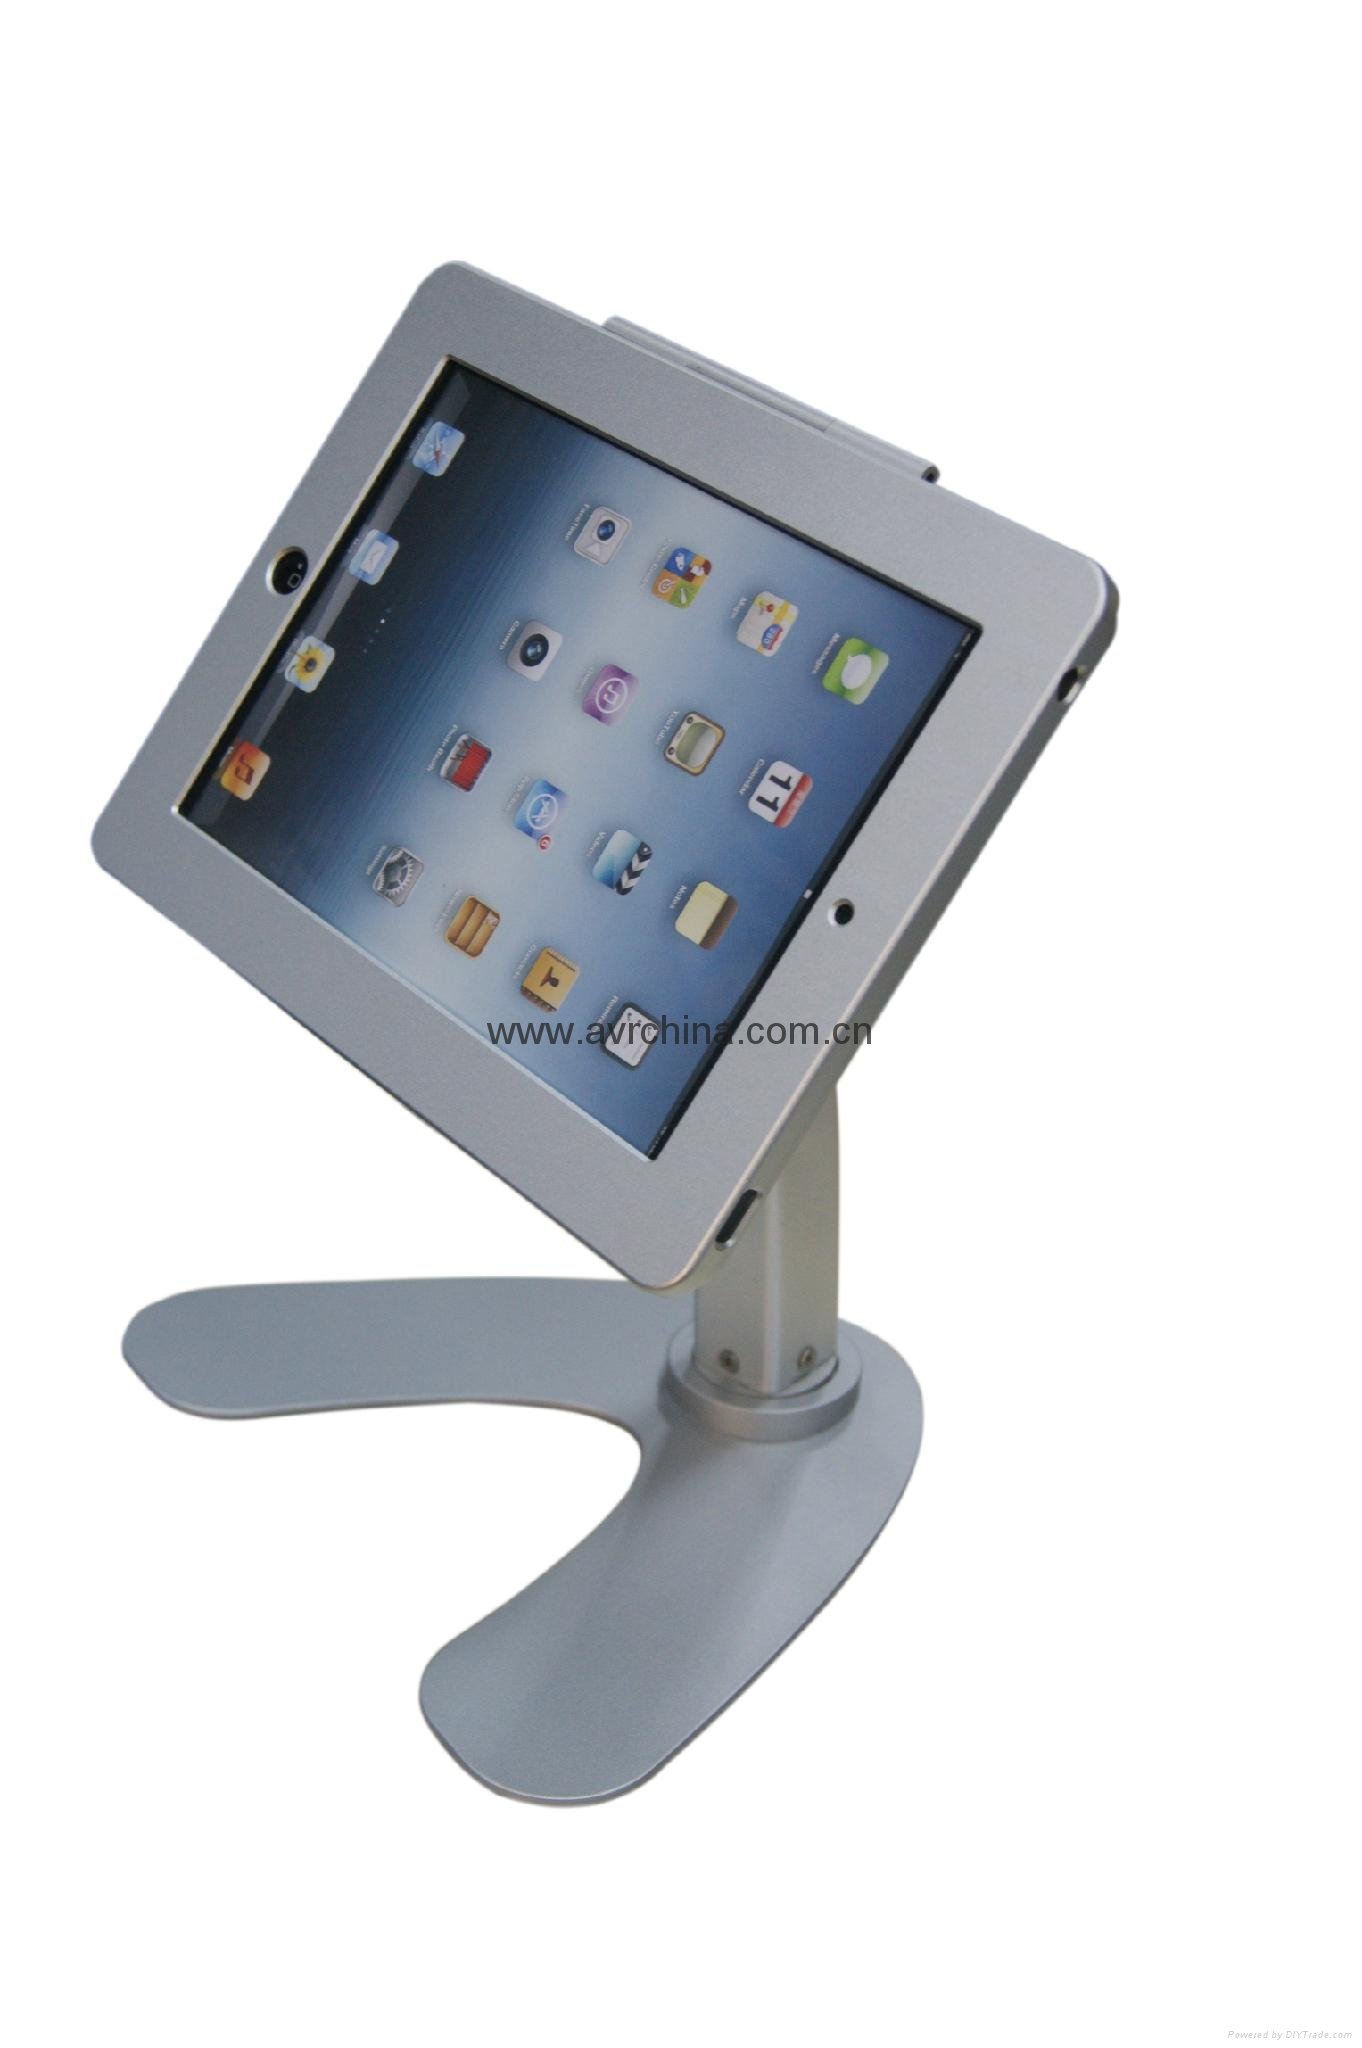 Table tablet for Ipad whatsapp:+65 8498 4312 4